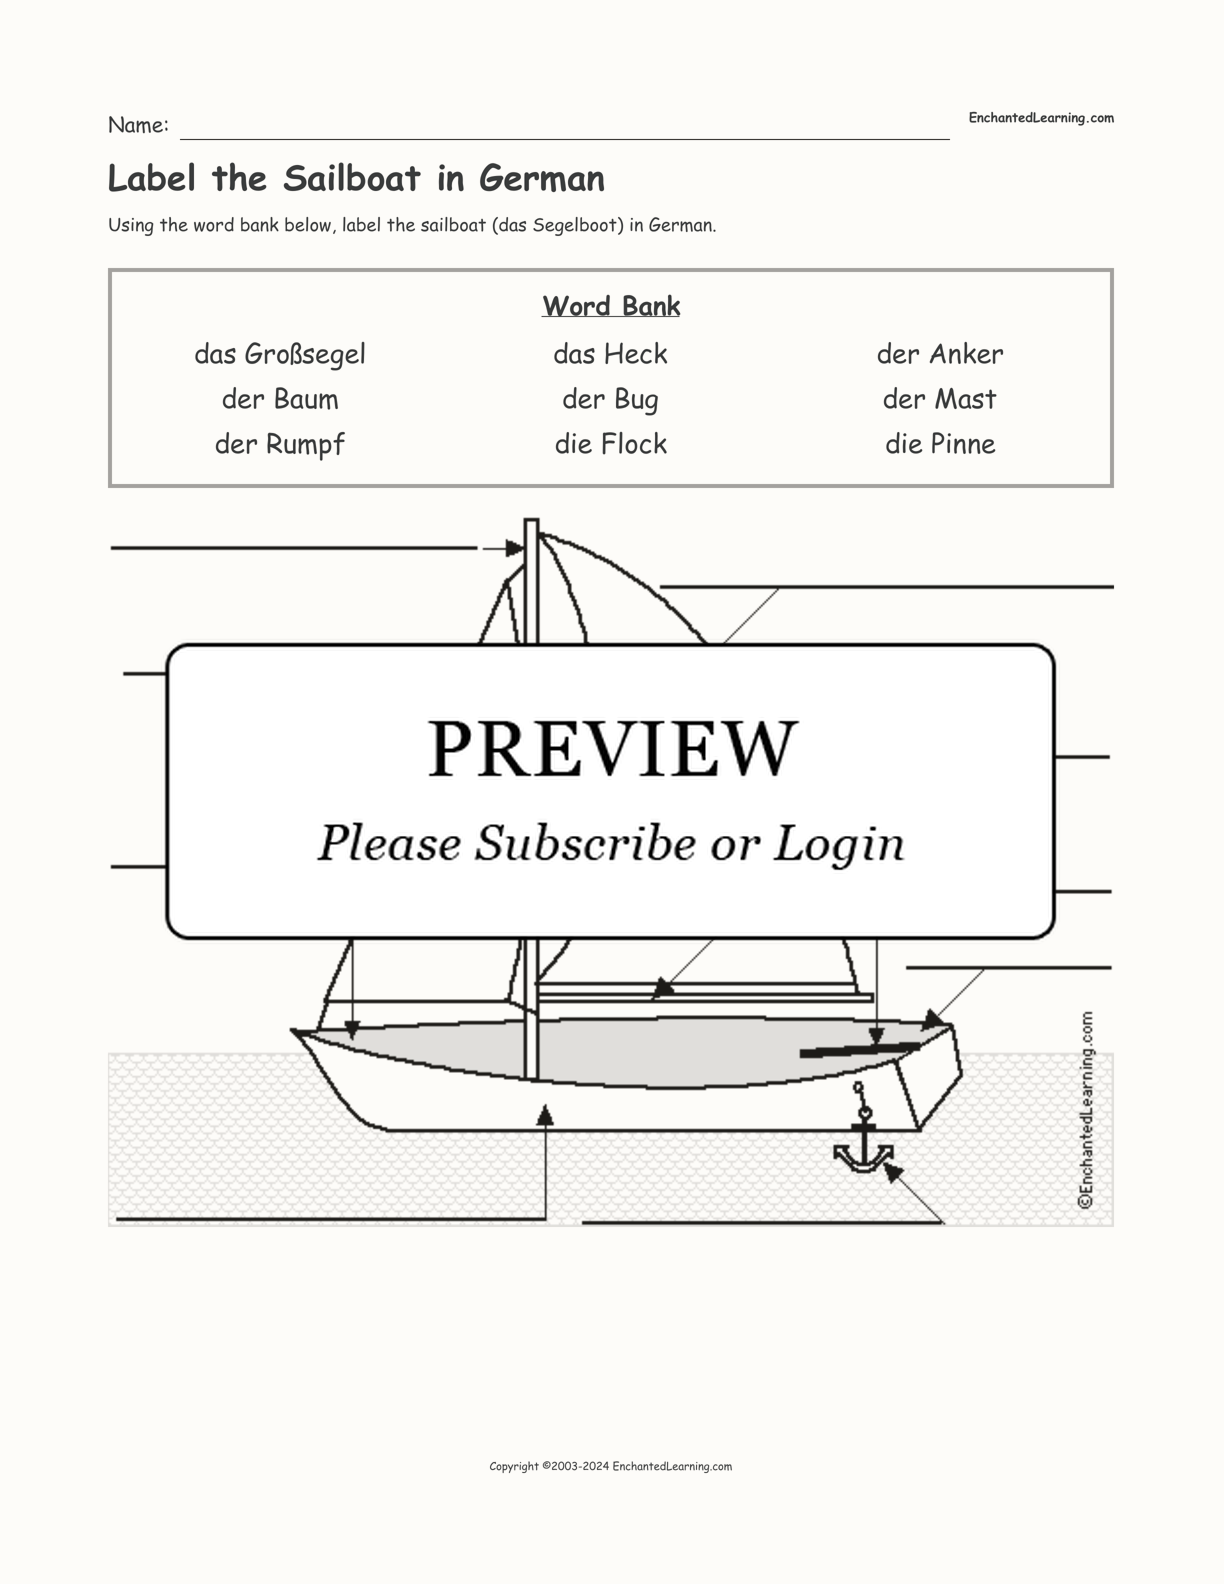 Label the Sailboat in German interactive worksheet page 1